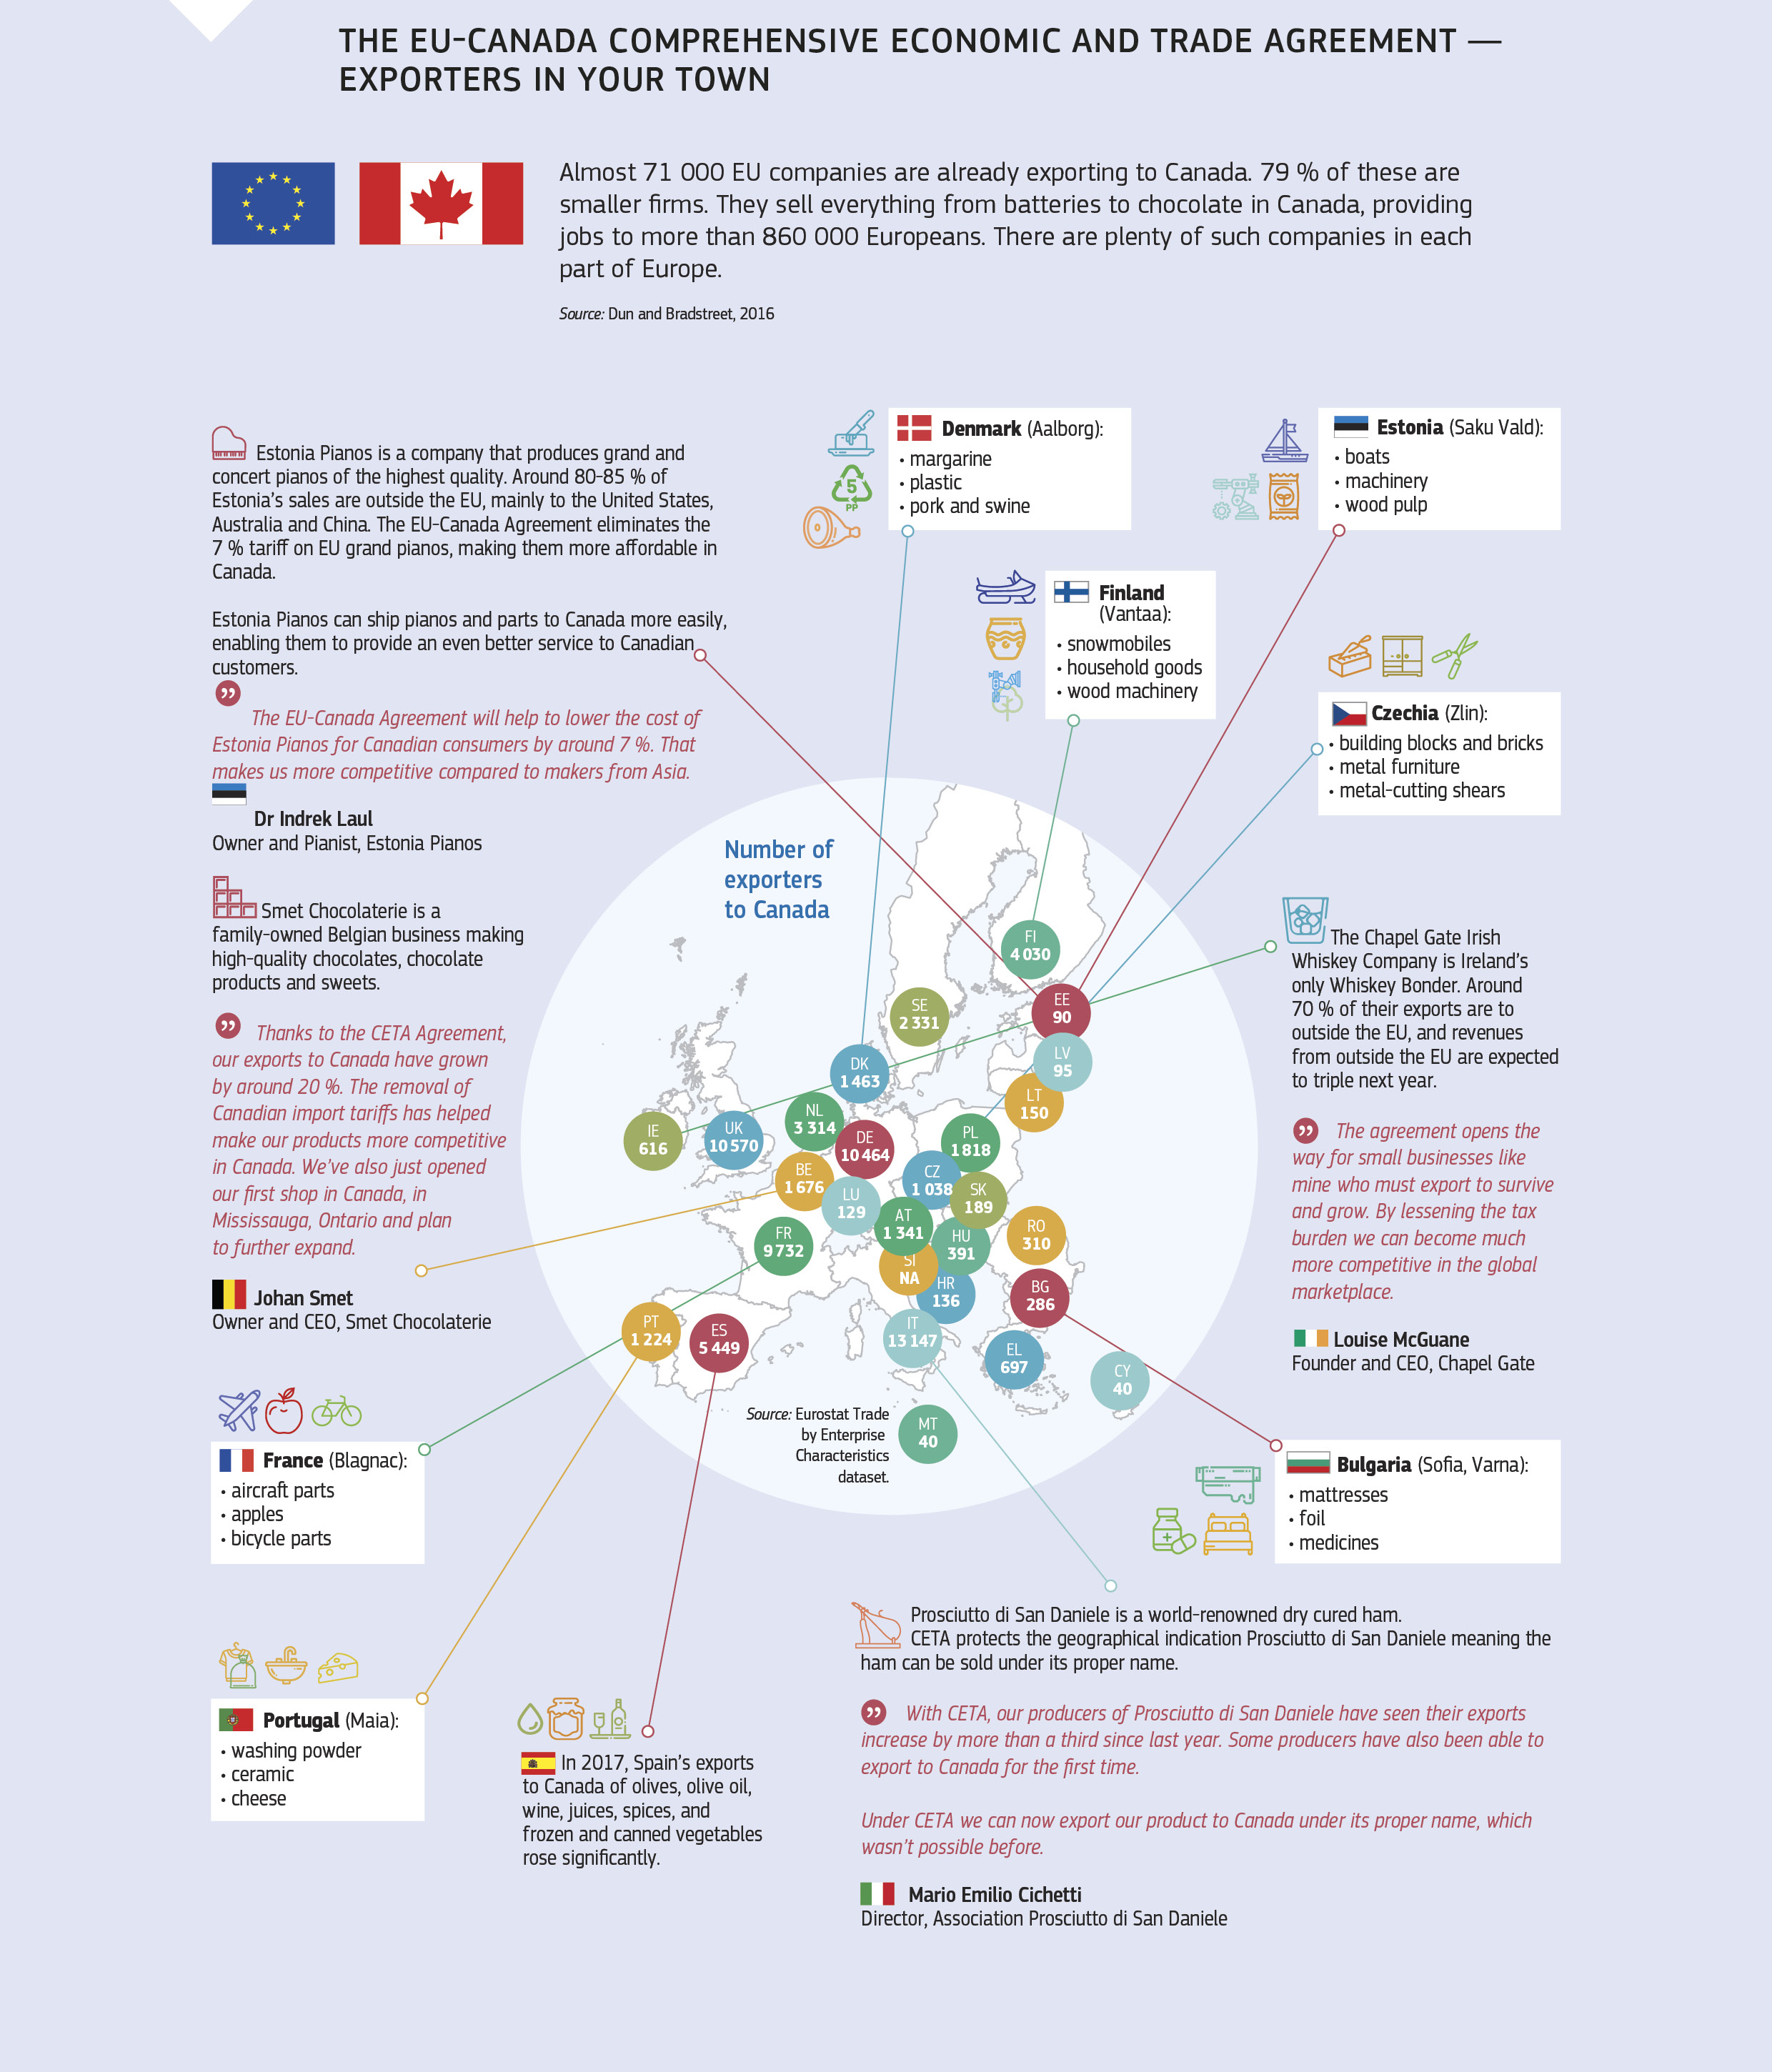 THE EU-CANADA COMPREHENSIVE ECONOMIC AND TRADE AGREEMENT — EXPORTERS in YOUR TOWN